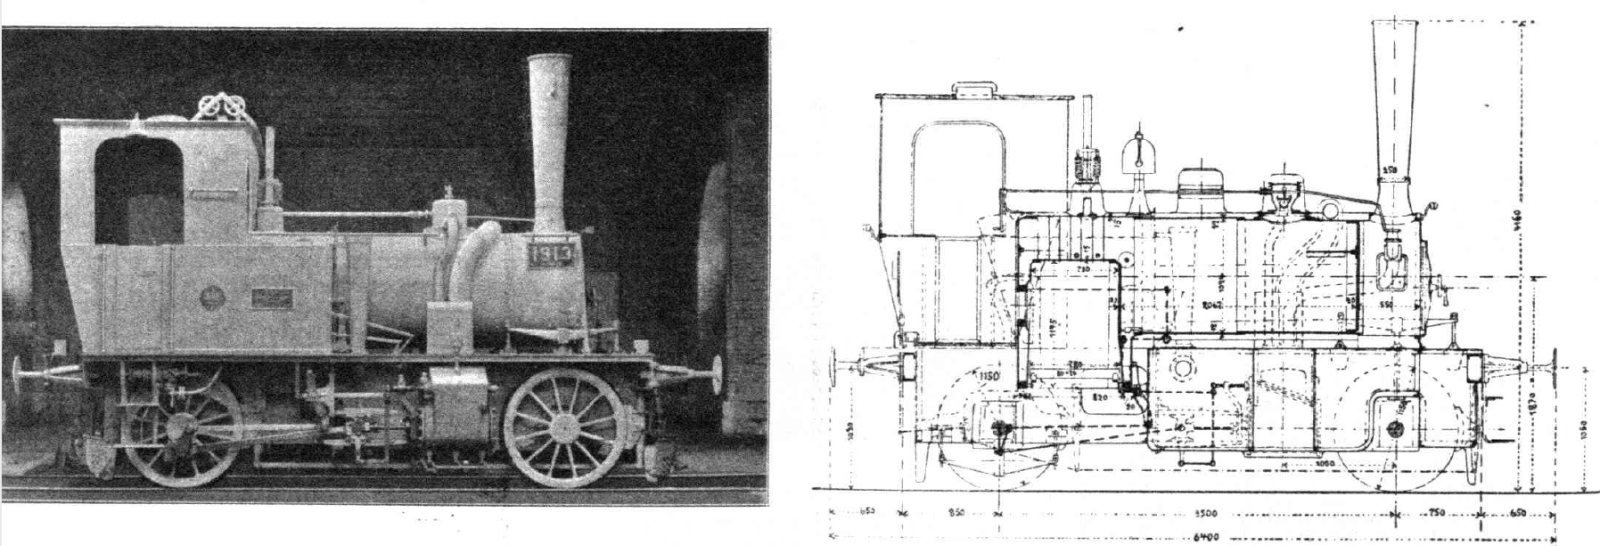 Photo and sectional drawing of the standard design